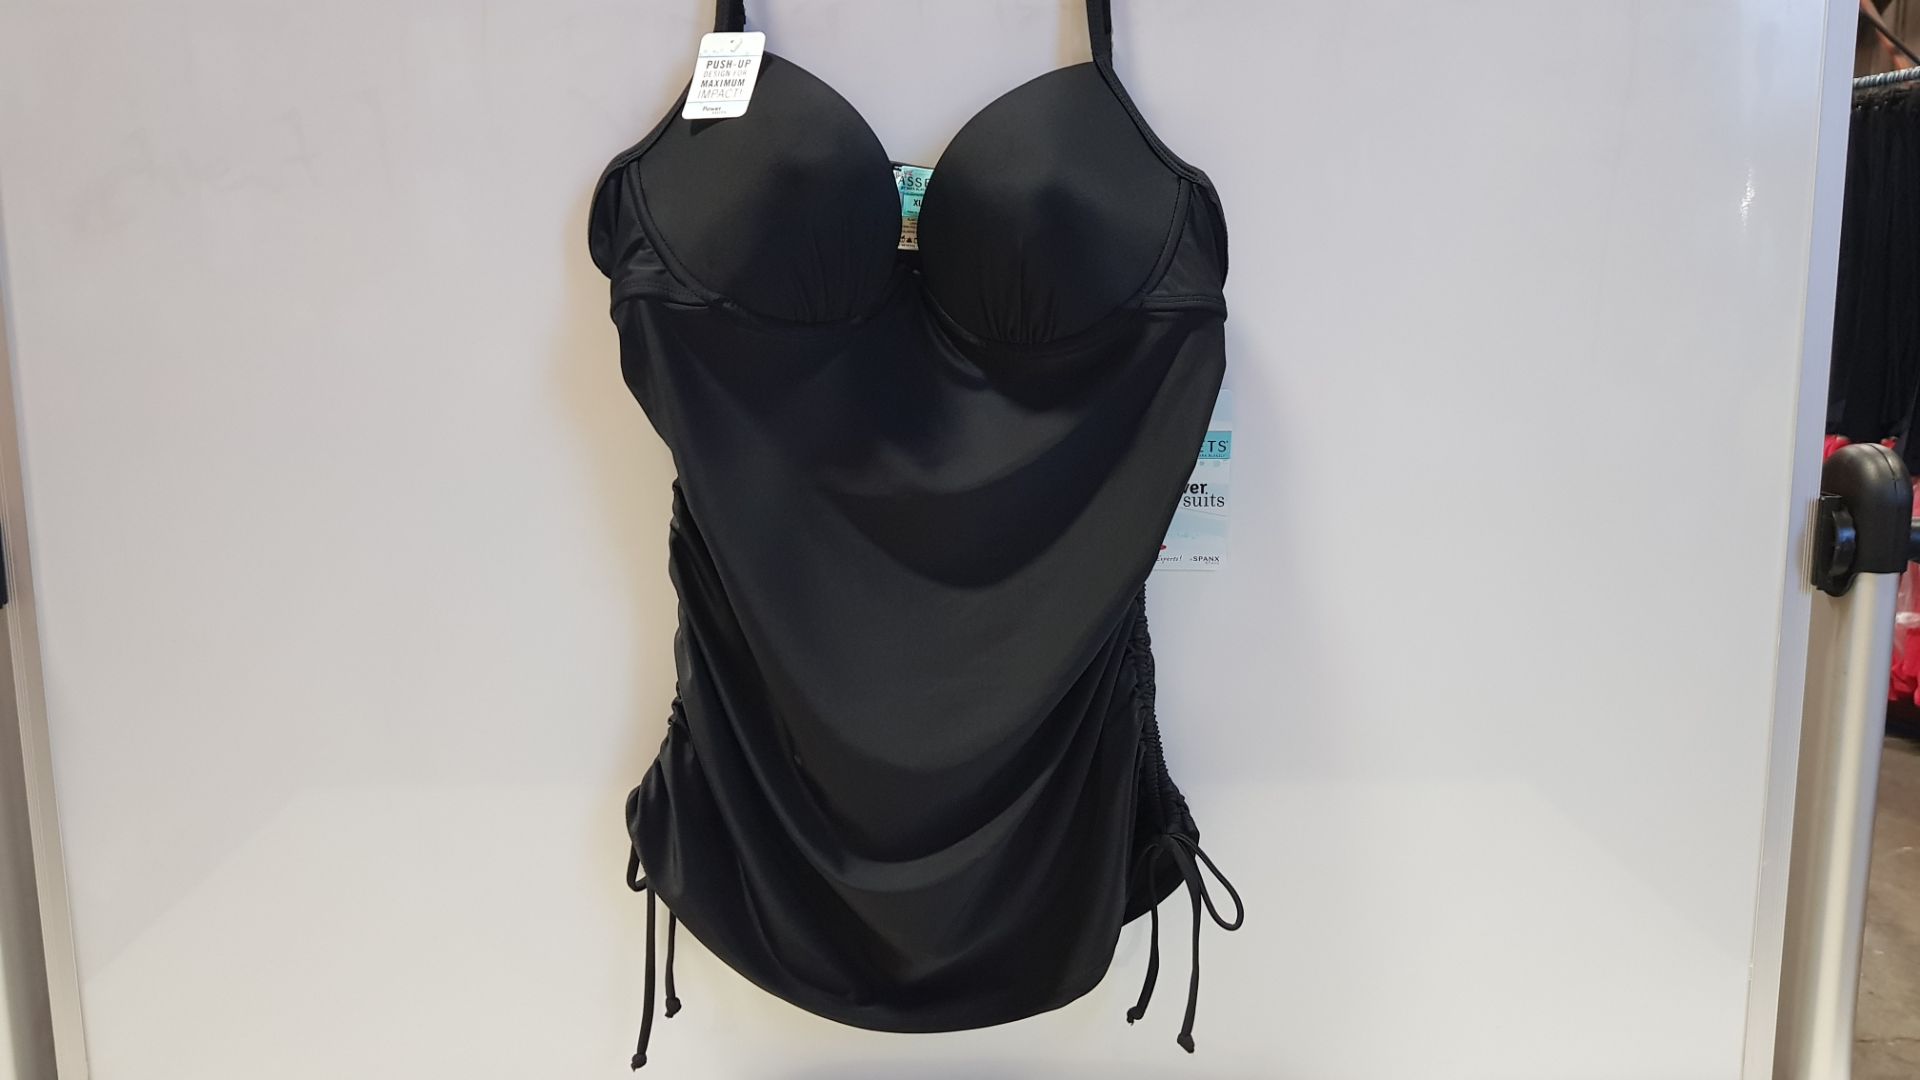 25 X BRAND NEW LOVE YOUR ASSESTS BY SPANX JET BLACK PUSH UP TANKINI IN SIZE XL. - IN ONE BOX RRP $